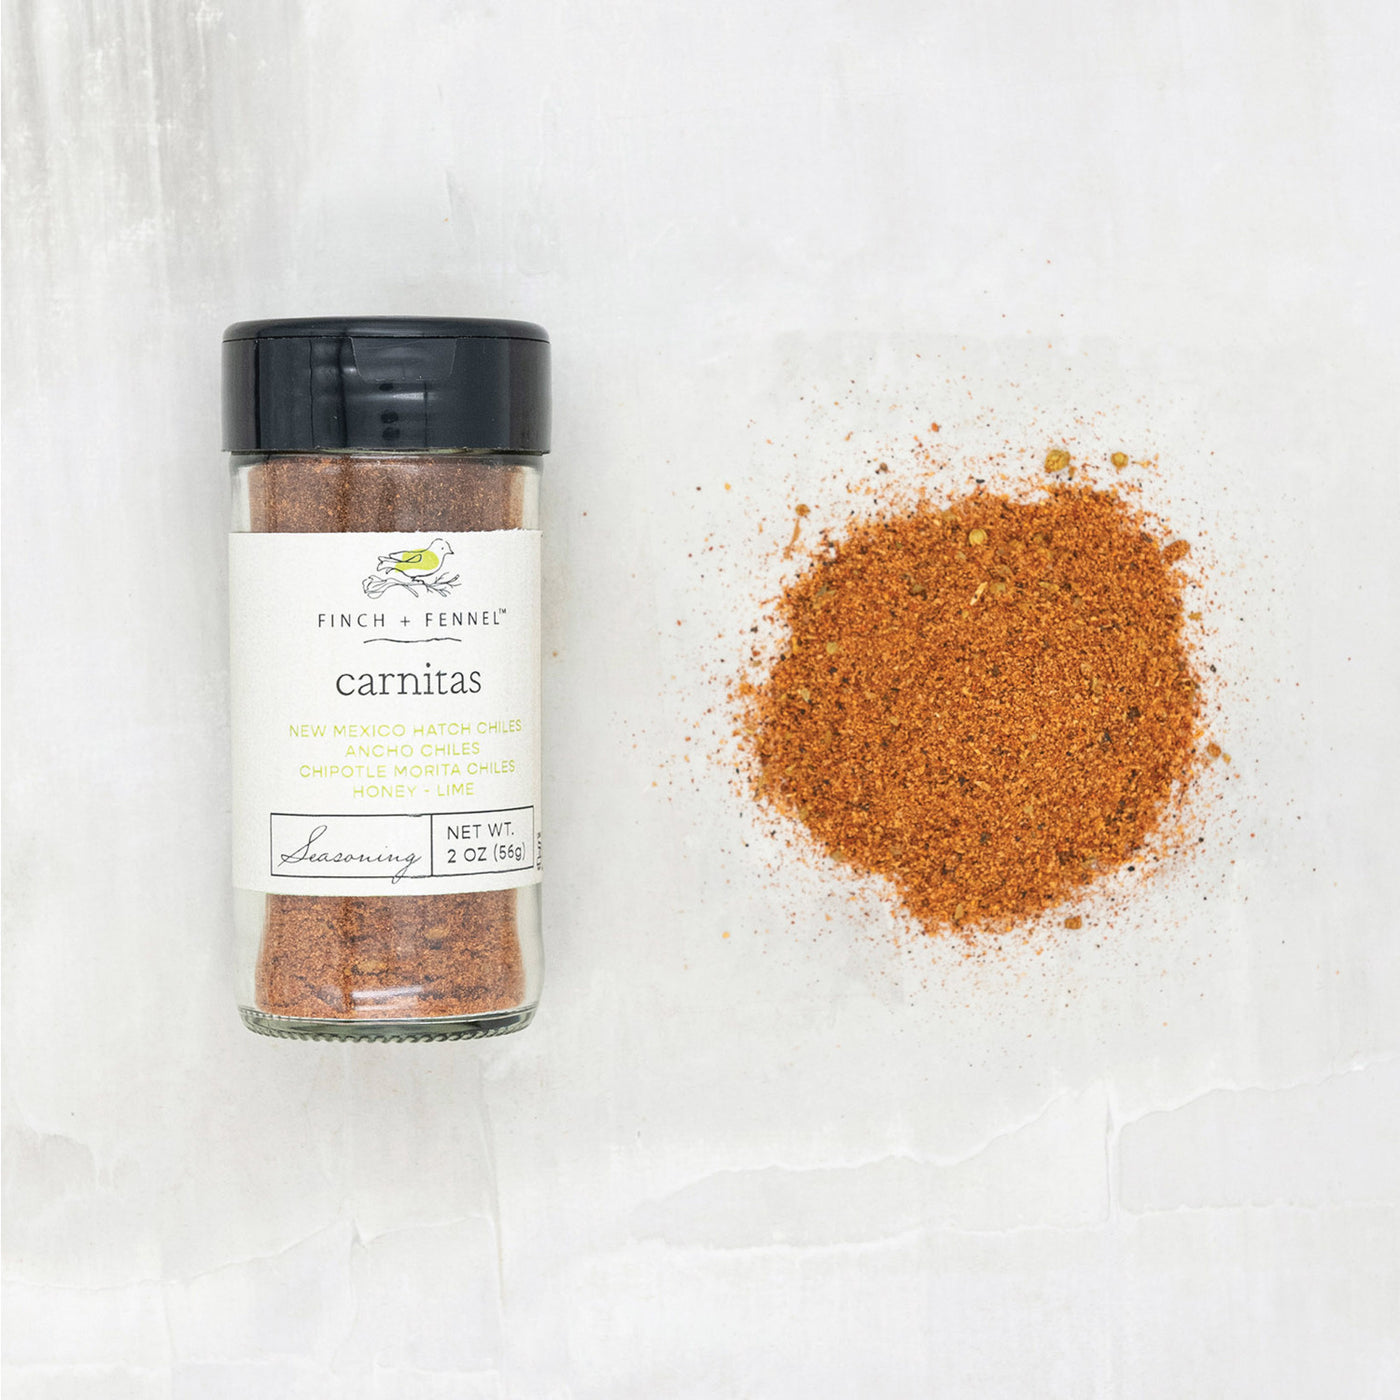 Finch + Fennel Carnitas Seasoning Available at Davis Porch and Patio Weatherford Texas